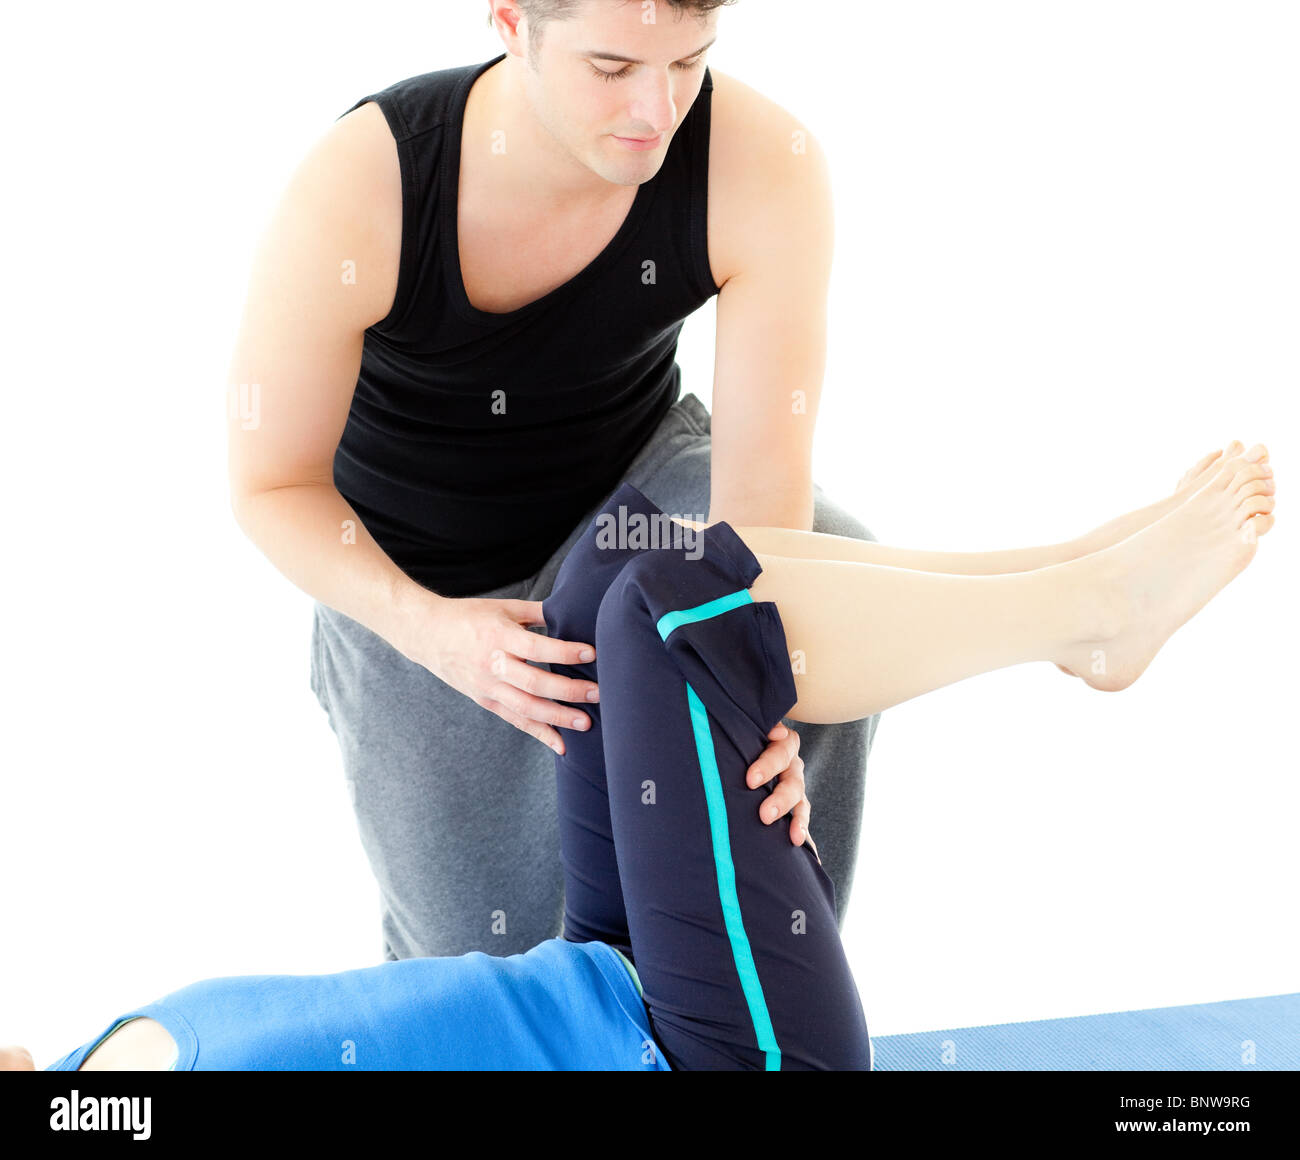 Woman exercising assited by her personal trainer Stock Photo